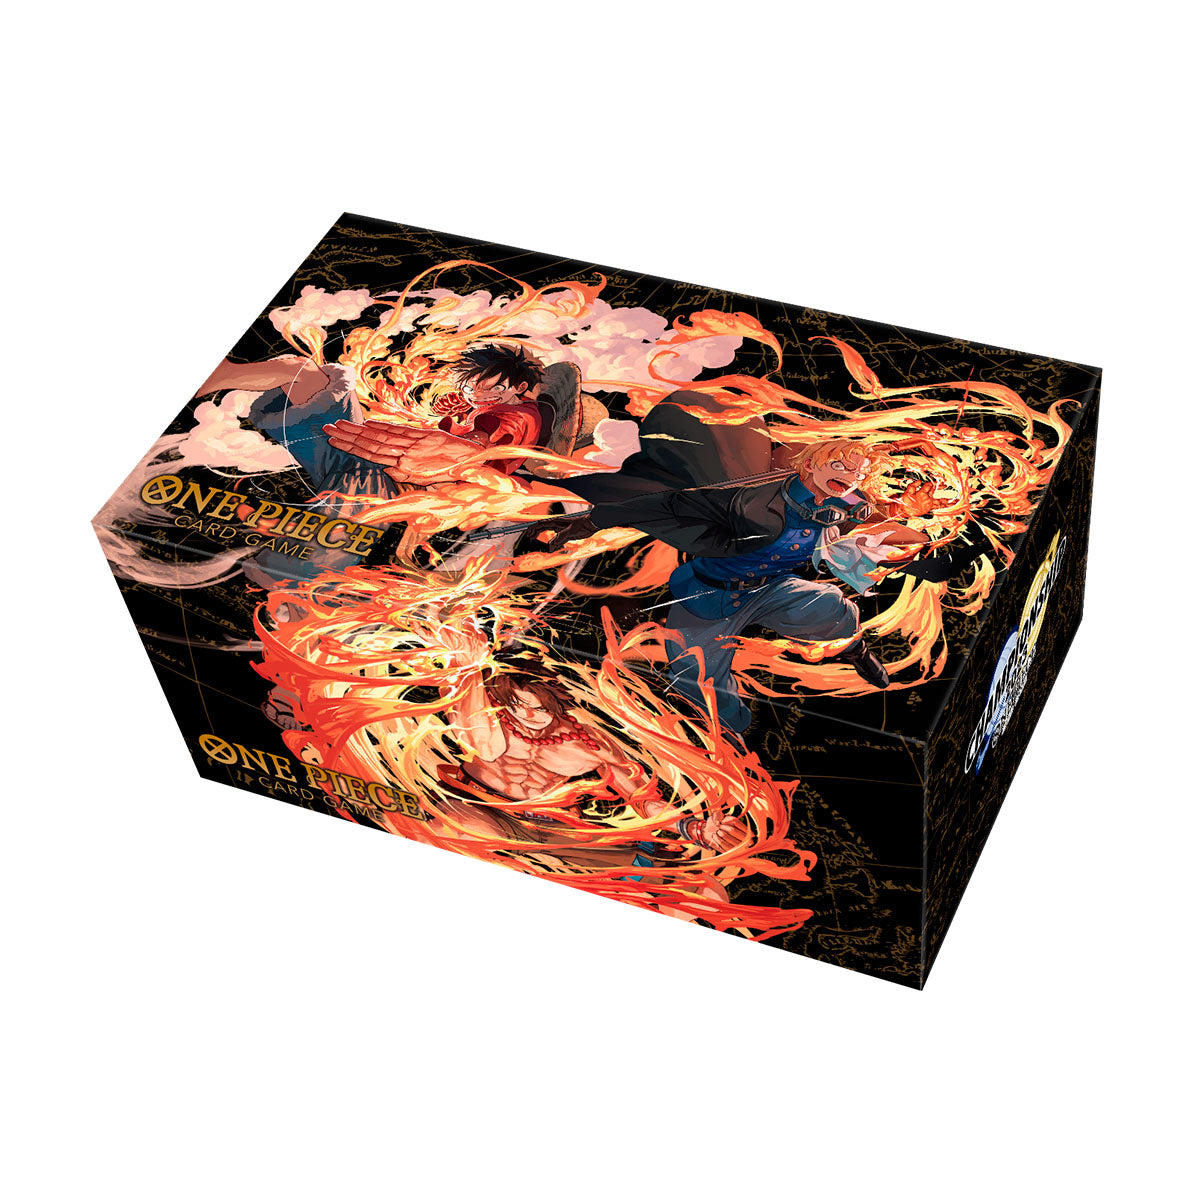 ONE PIECE CARD GAME Playmat and Storage Box Set -Monkey.D.Luffy-, ONE PIECE